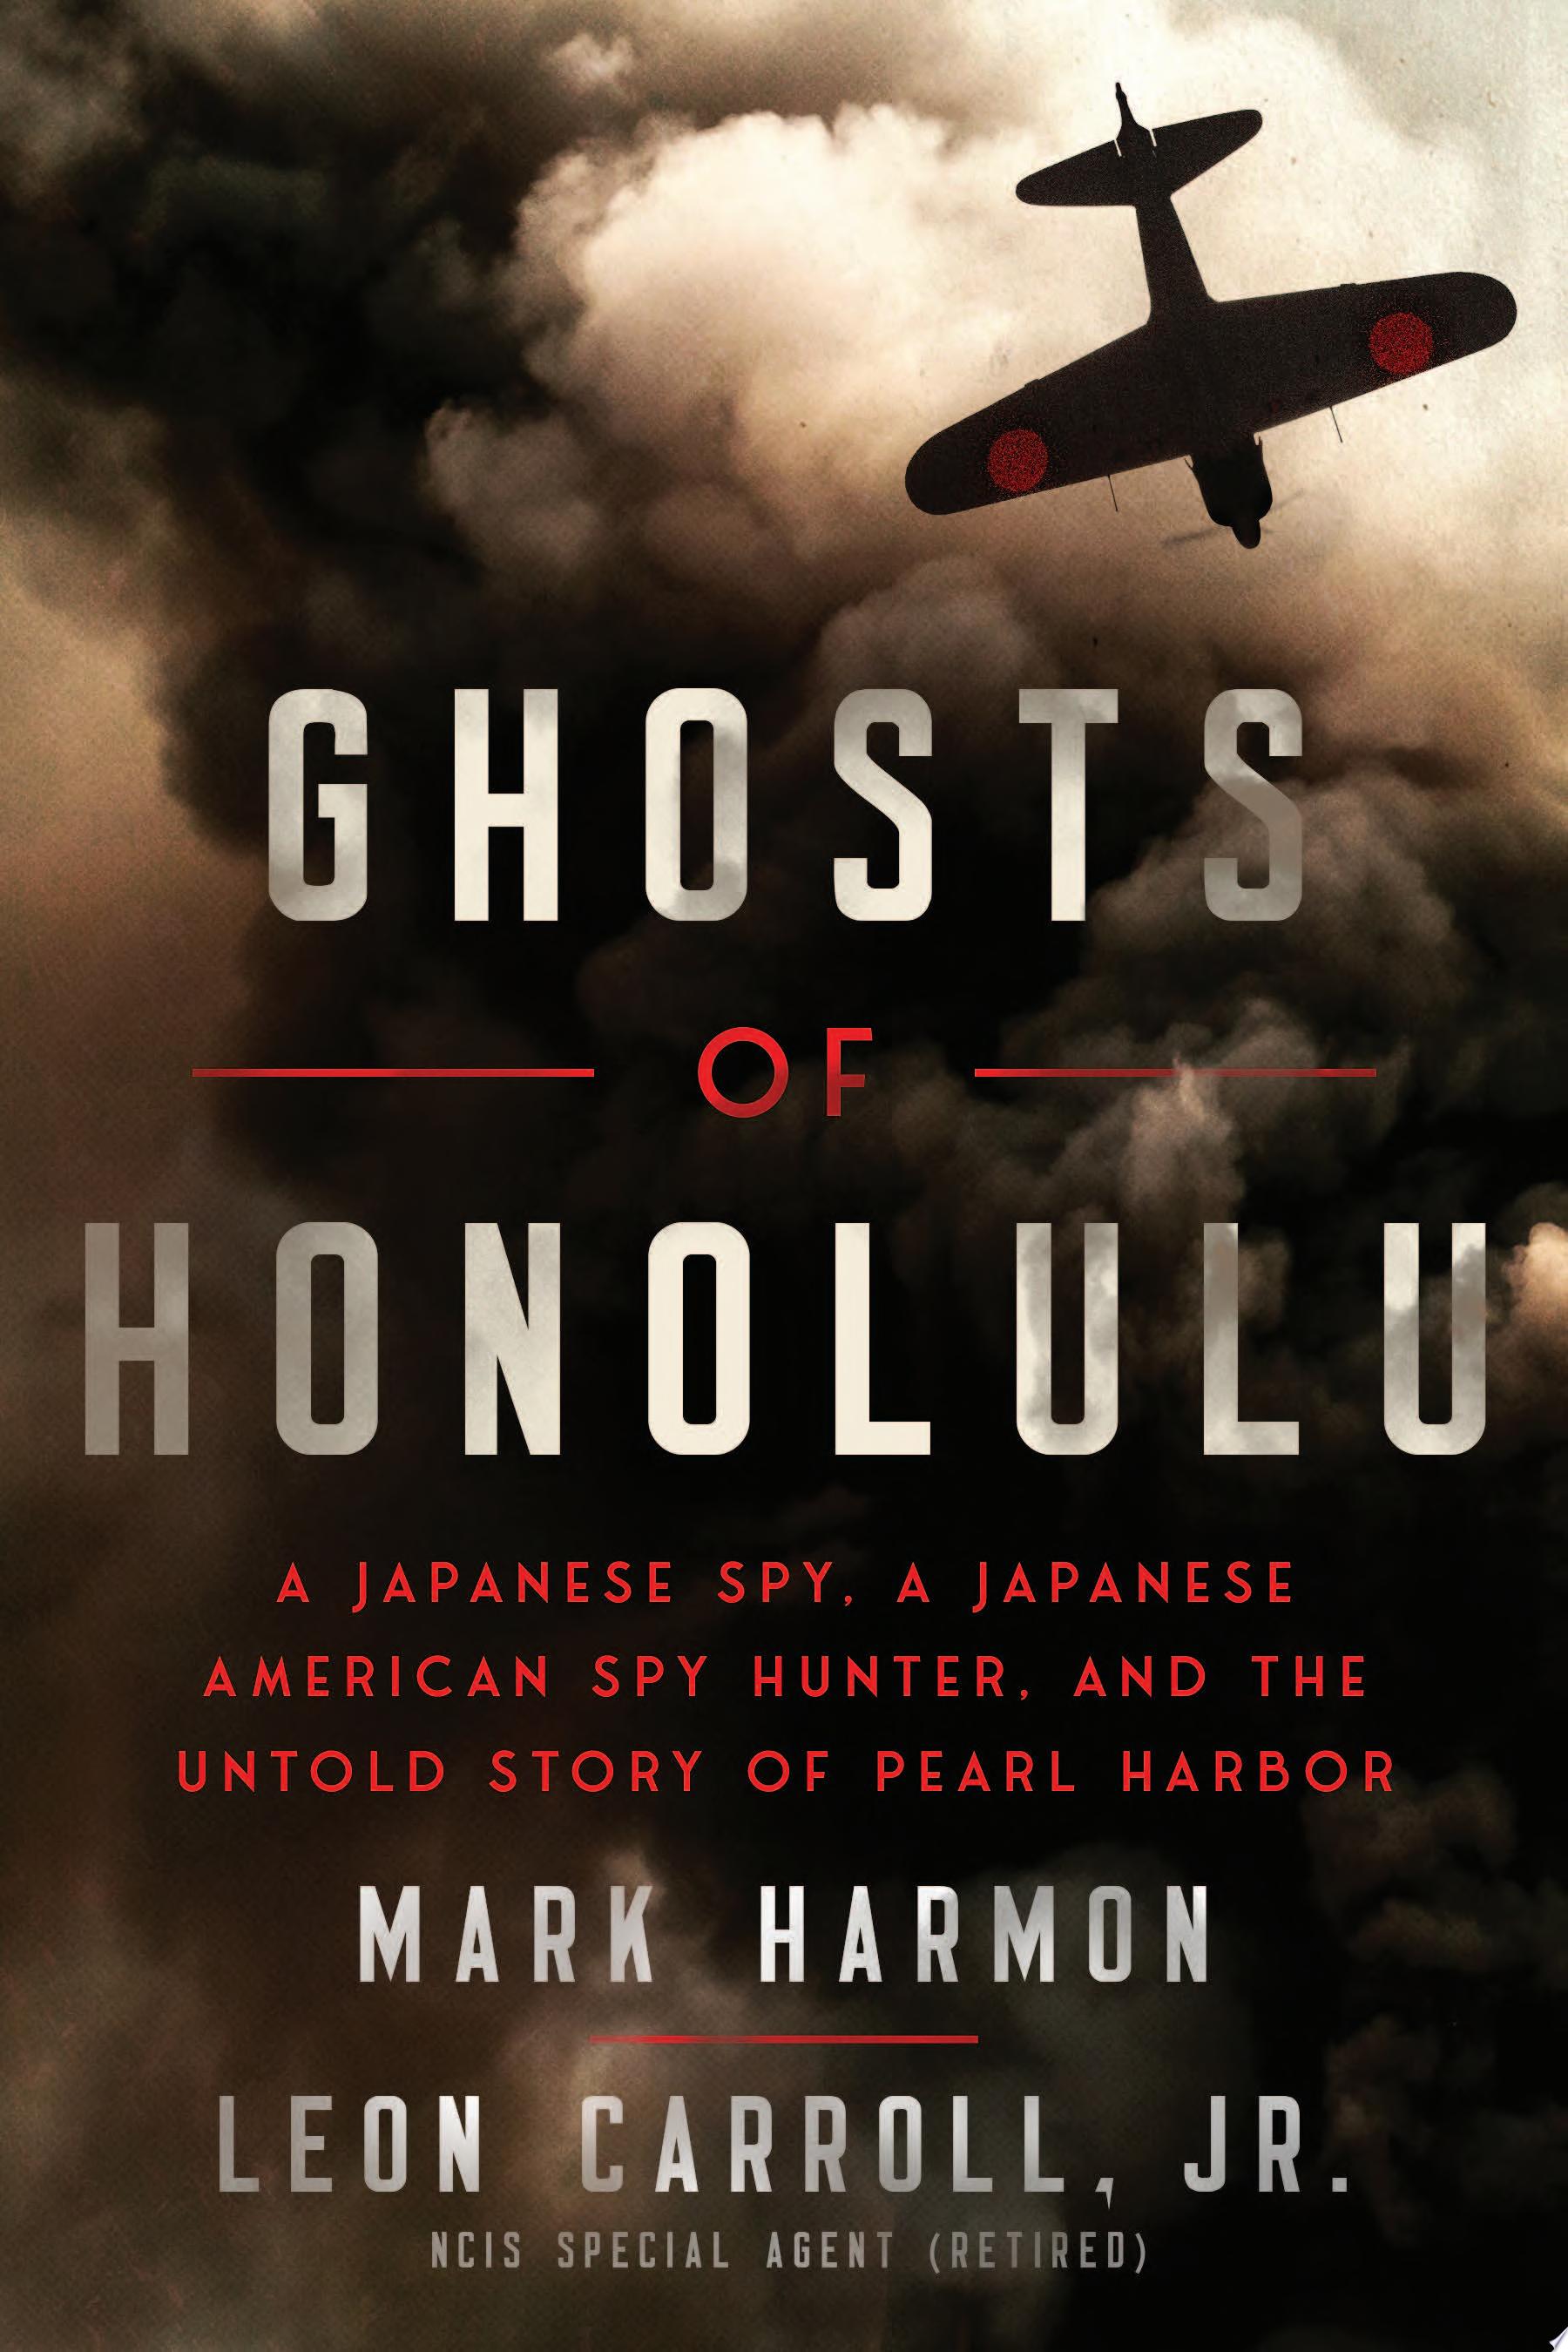 Image for "Ghosts of Honolulu"